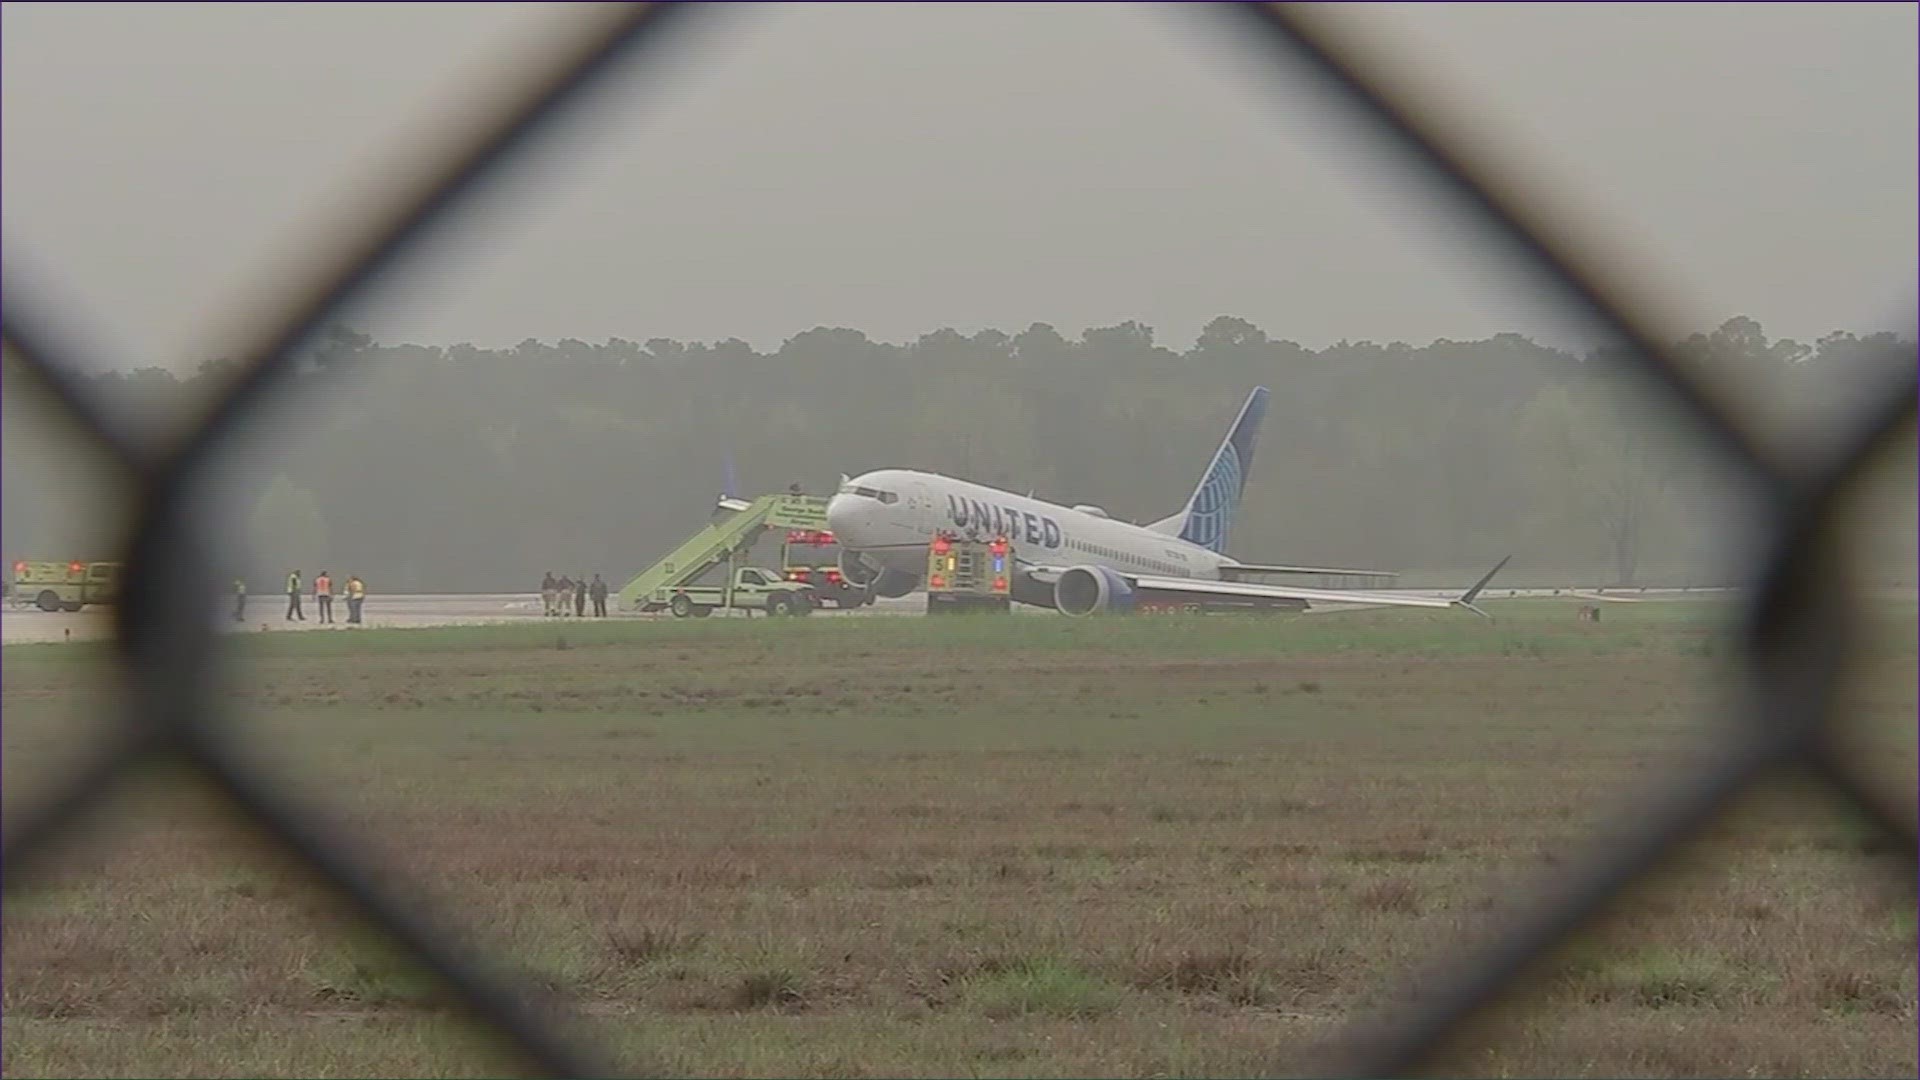 Passengers were forced to evacuate a plane after it went into the grass at Houston's George Bush Intercontinental Airport.